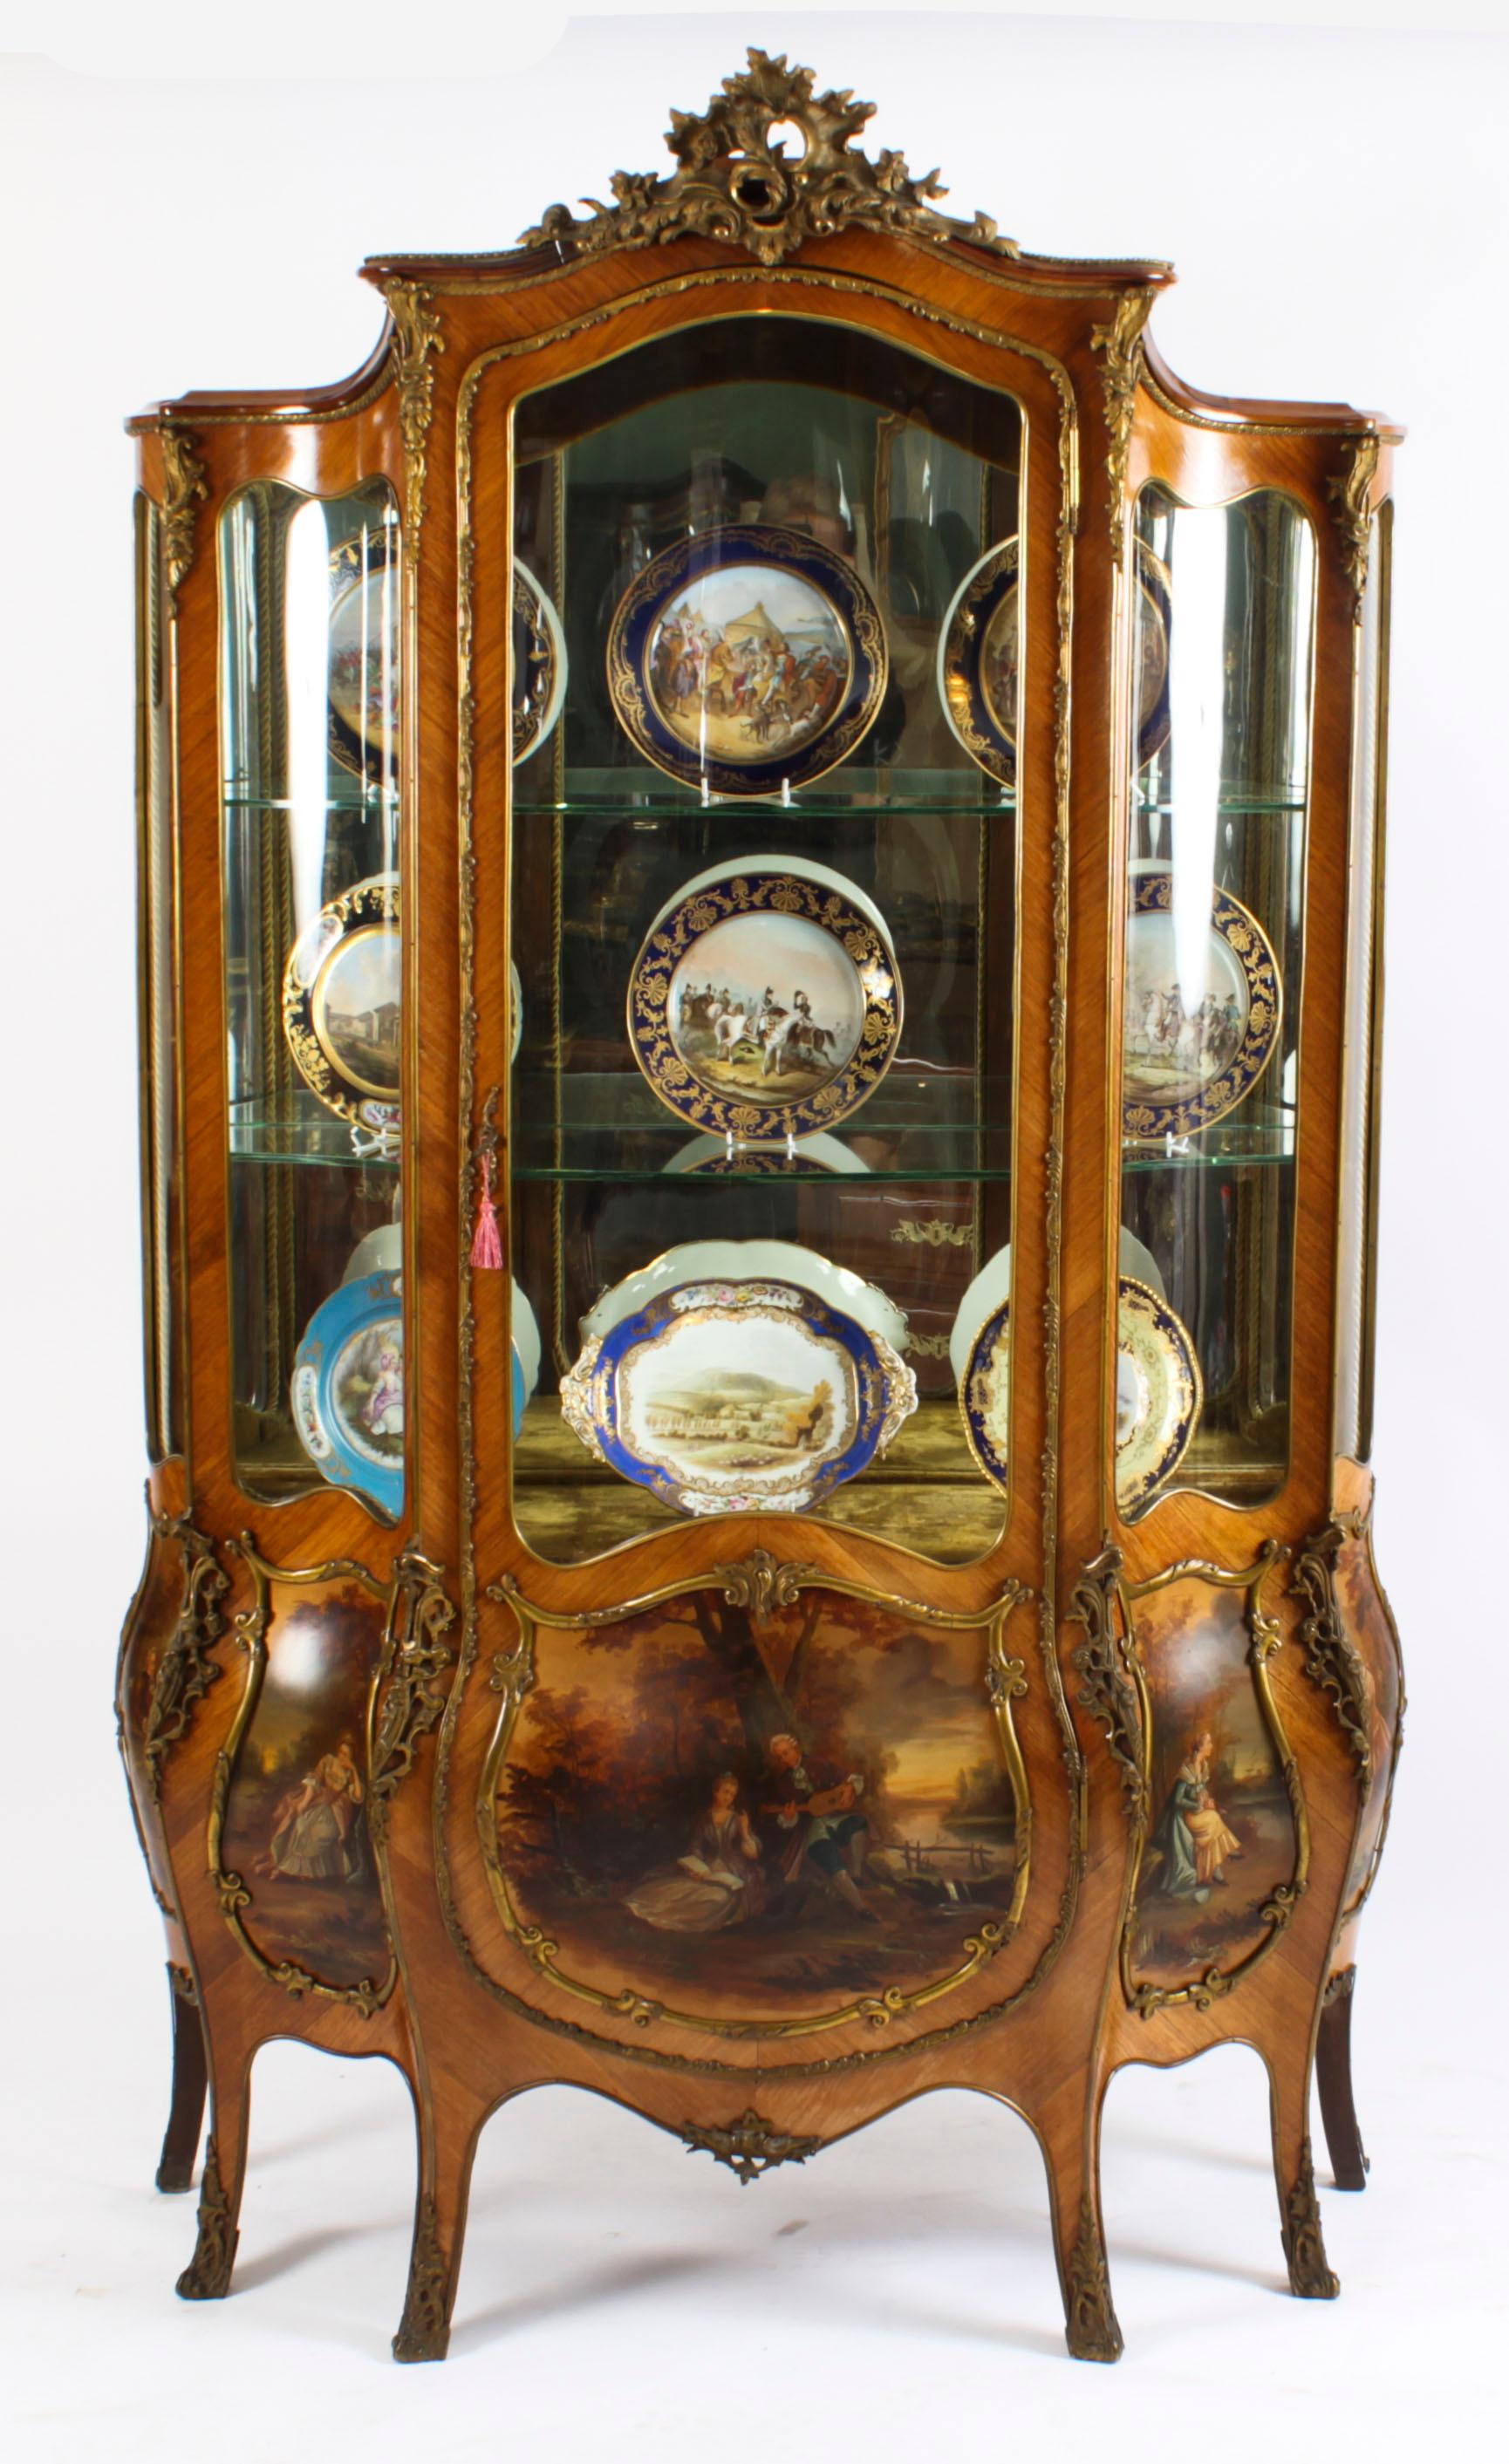 A stunning large antique French wood Vernis Martin five panel display cabinet in the Louis XV manner and of extravagantly shaped Bombe form, circa 1870 in date, with exquisite hand painted decoration and exquisite ormolu mounts.
 
It has five